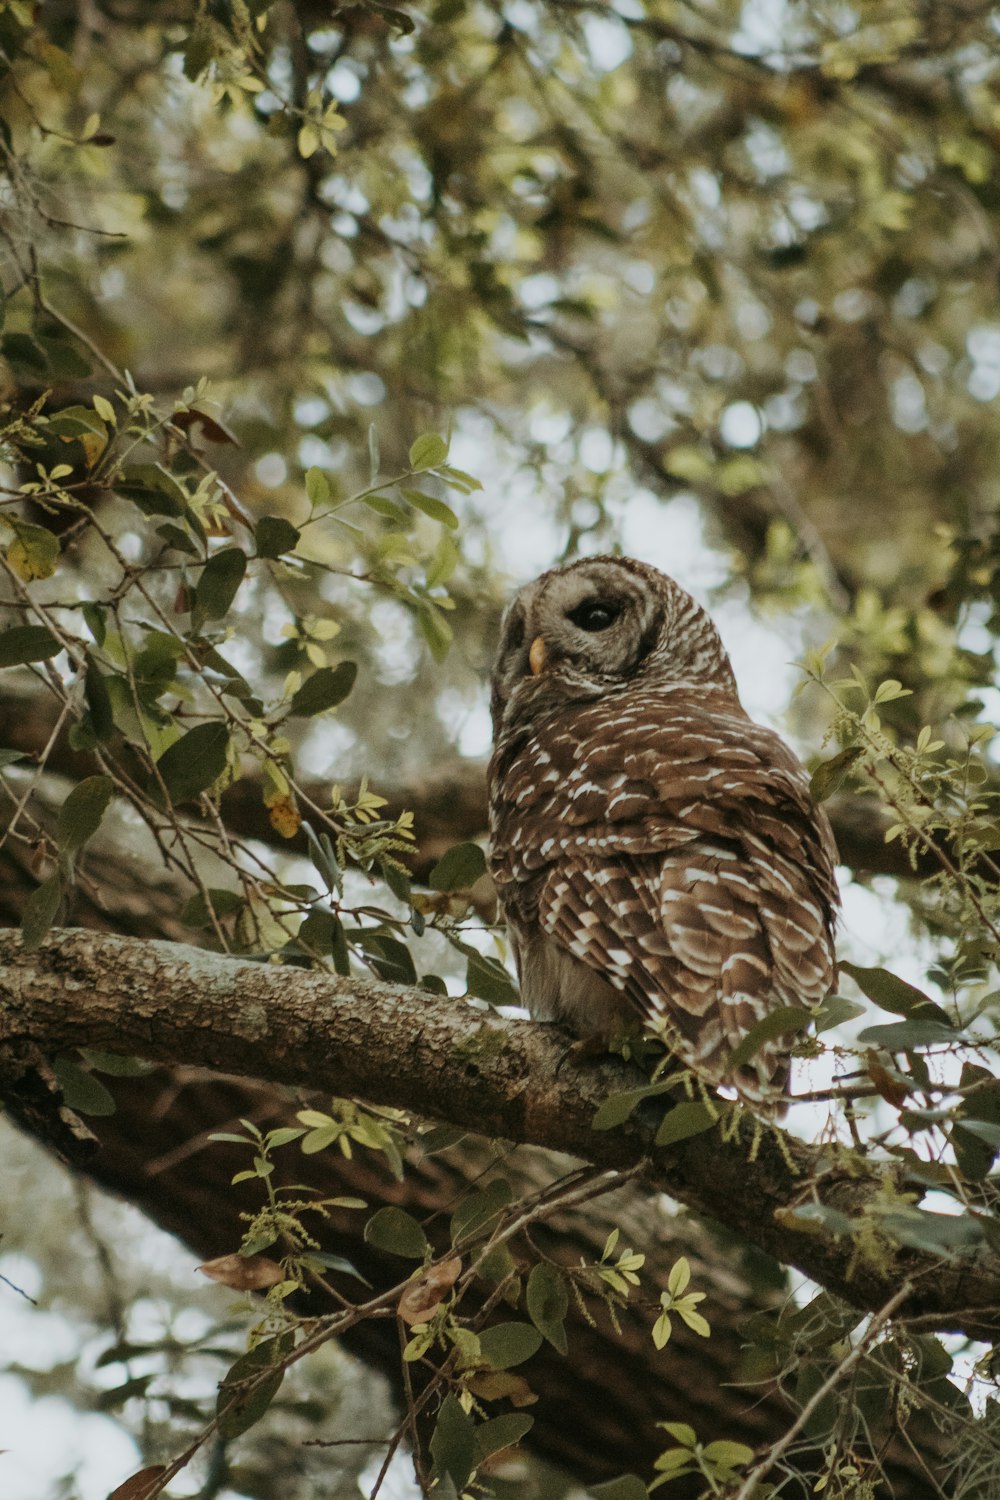 brown and white owl on tree branch during daytime